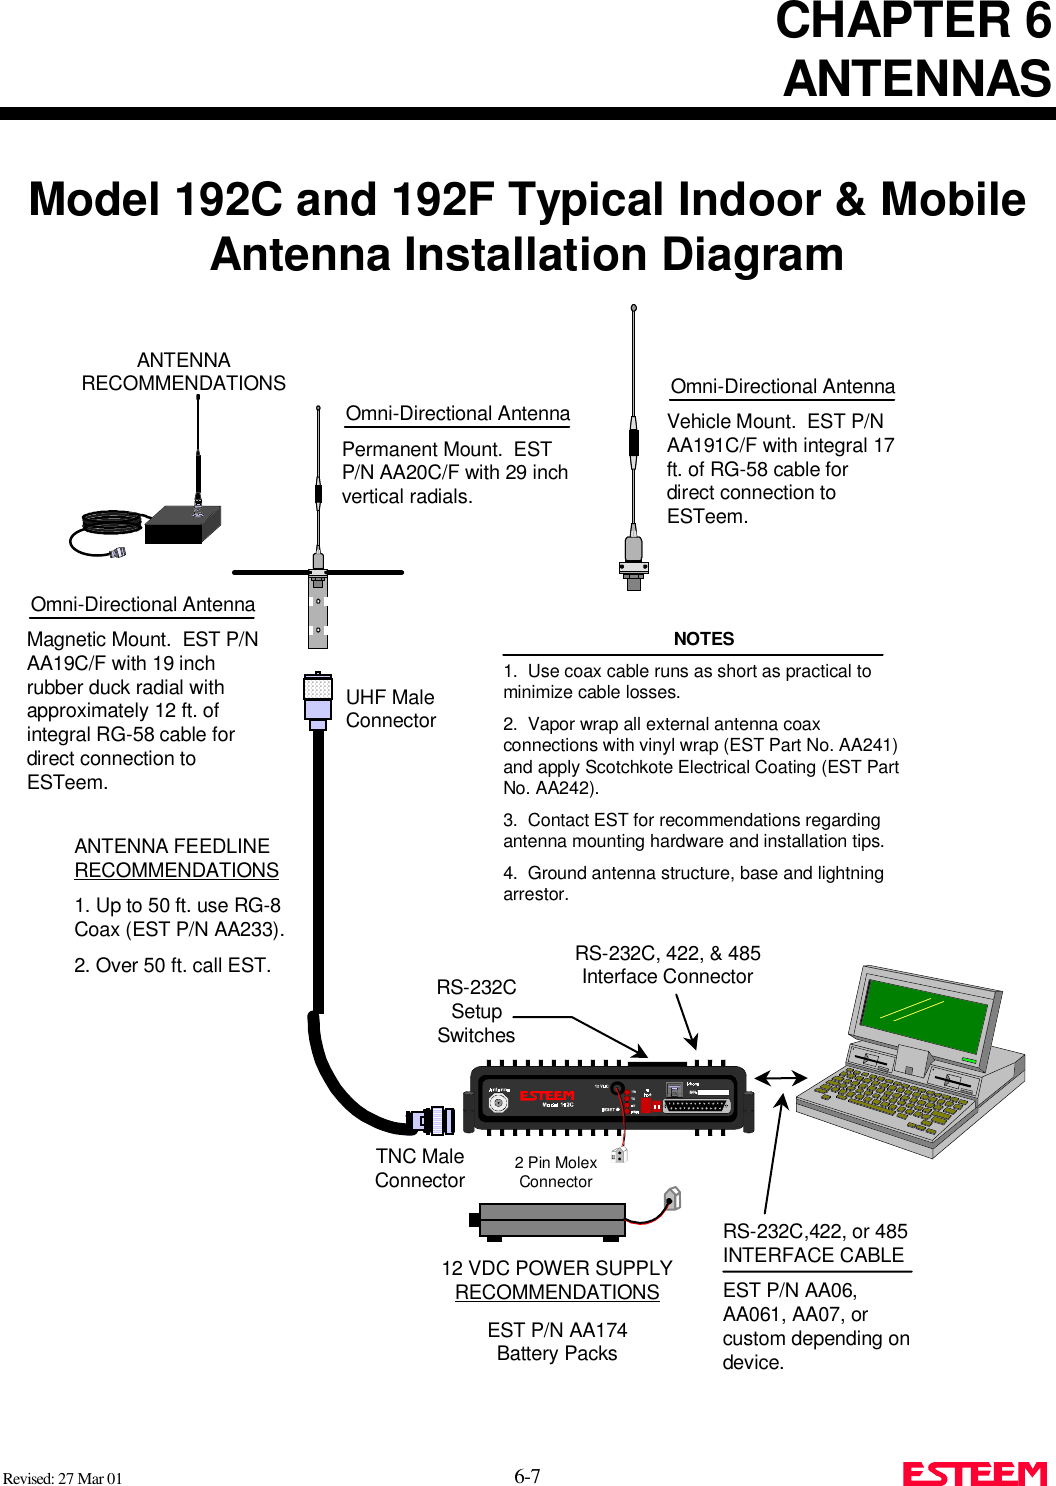 CHAPTER 6ANTENNASRevised: 27 Mar 01 6-7Model 192C and 192F Typical Indoor &amp; MobileAntenna Installation DiagramUHF MaleConnectorANTENNA FEEDLINERECOMMENDATIONS1. Up to 50 ft. use RG-8Coax (EST P/N AA233).2. Over 50 ft. call EST.TNC MaleConnector12 VDC POWER SUPPLYRECOMMENDATIONSEST P/N AA174Battery Packs2 Pin MolexConnectorRS-232CSetupSwitchesRS-232C, 422, &amp; 485Interface ConnectorRS-232C,422, or 485INTERFACE CABLEEST P/N AA06,AA061, AA07, orcustom depending ondevice.Omni-Directional AntennaMagnetic Mount.  EST P/NAA19C/F with 19 inchrubber duck radial withapproximately 12 ft. ofintegral RG-58 cable fordirect connection toESTeem.Omni-Directional AntennaPermanent Mount.  ESTP/N AA20C/F with 29 inchvertical radials.ANTENNARECOMMENDATIONS Omni-Directional AntennaVehicle Mount.  EST P/NAA191C/F with integral 17ft. of RG-58 cable fordirect connection toESTeem.NOTES1.  Use coax cable runs as short as practical tominimize cable losses.2.  Vapor wrap all external antenna coaxconnections with vinyl wrap (EST Part No. AA241)and apply Scotchkote Electrical Coating (EST PartNo. AA242).3.  Contact EST for recommendations regardingantenna mounting hardware and installation tips.4.  Ground antenna structure, base and lightningarrestor.